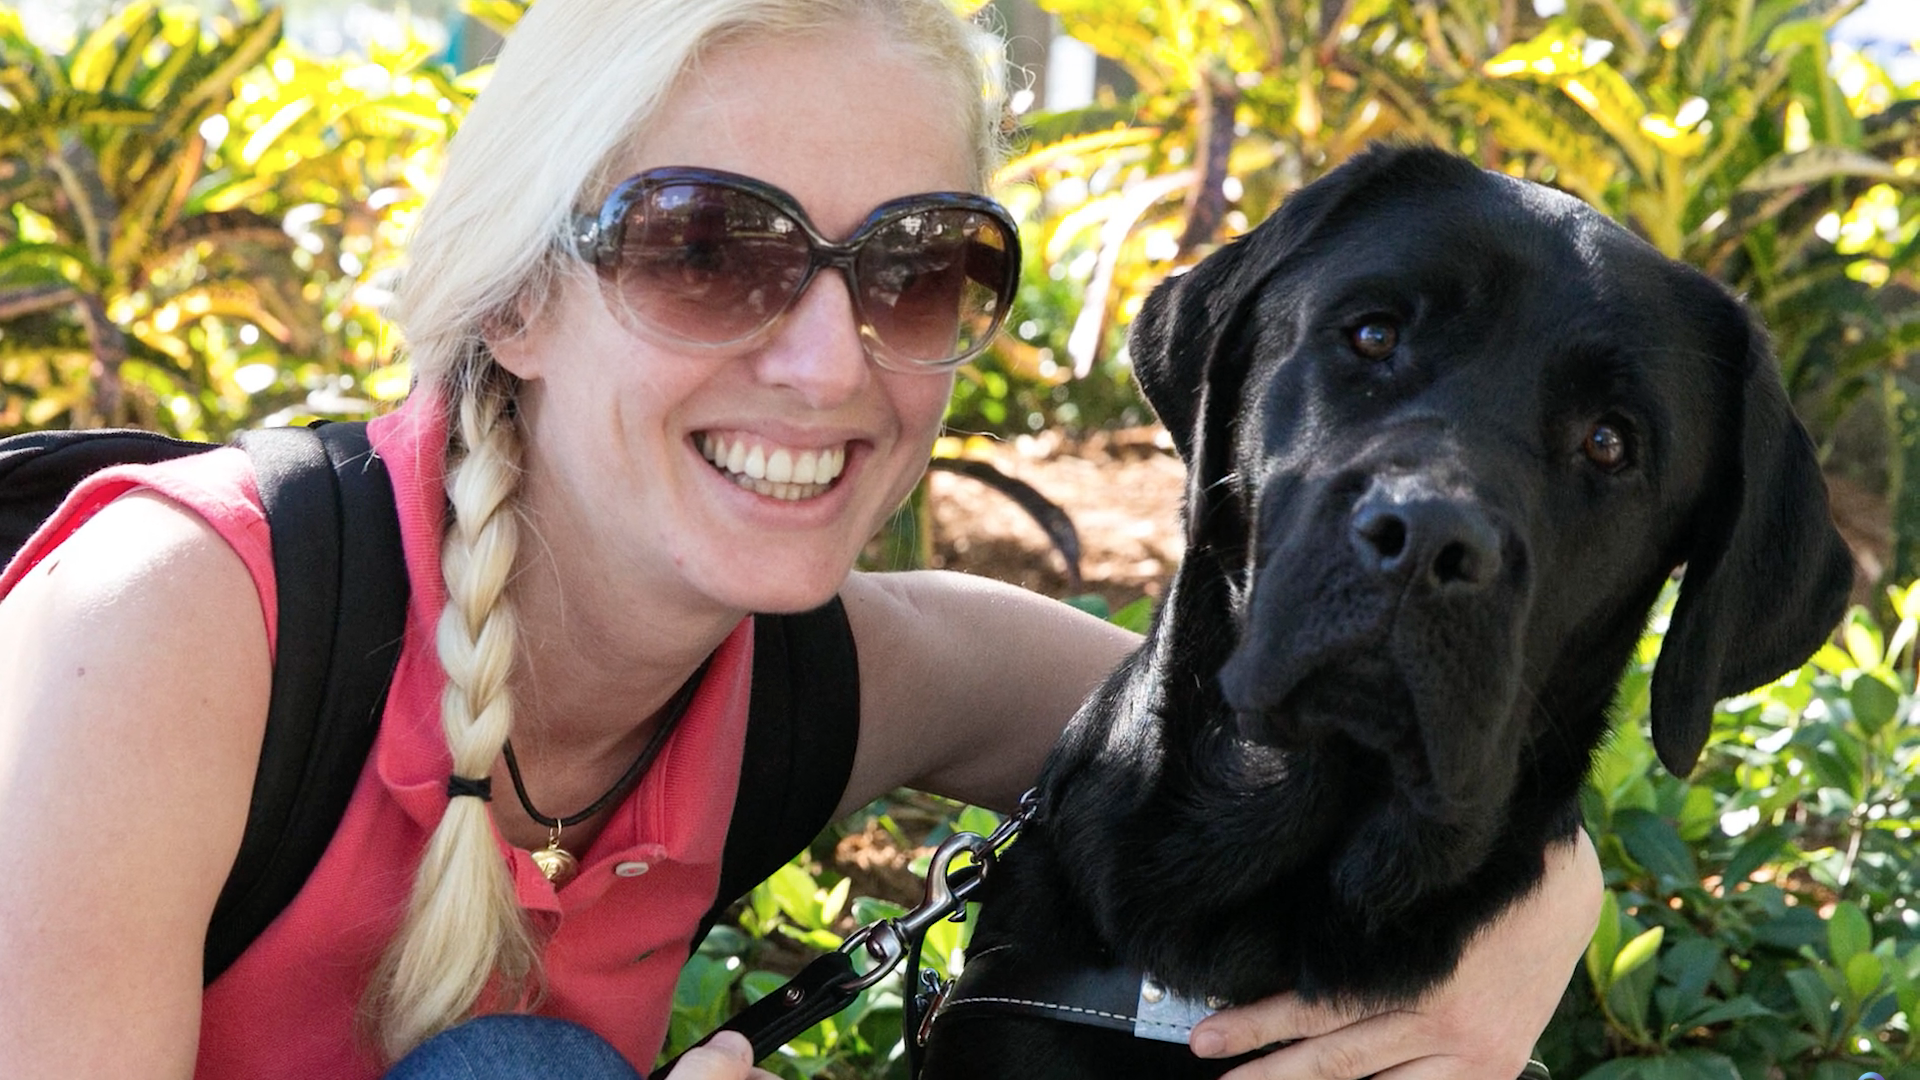 Woman leans over and has arm around black guide dog while she smiles at the camera